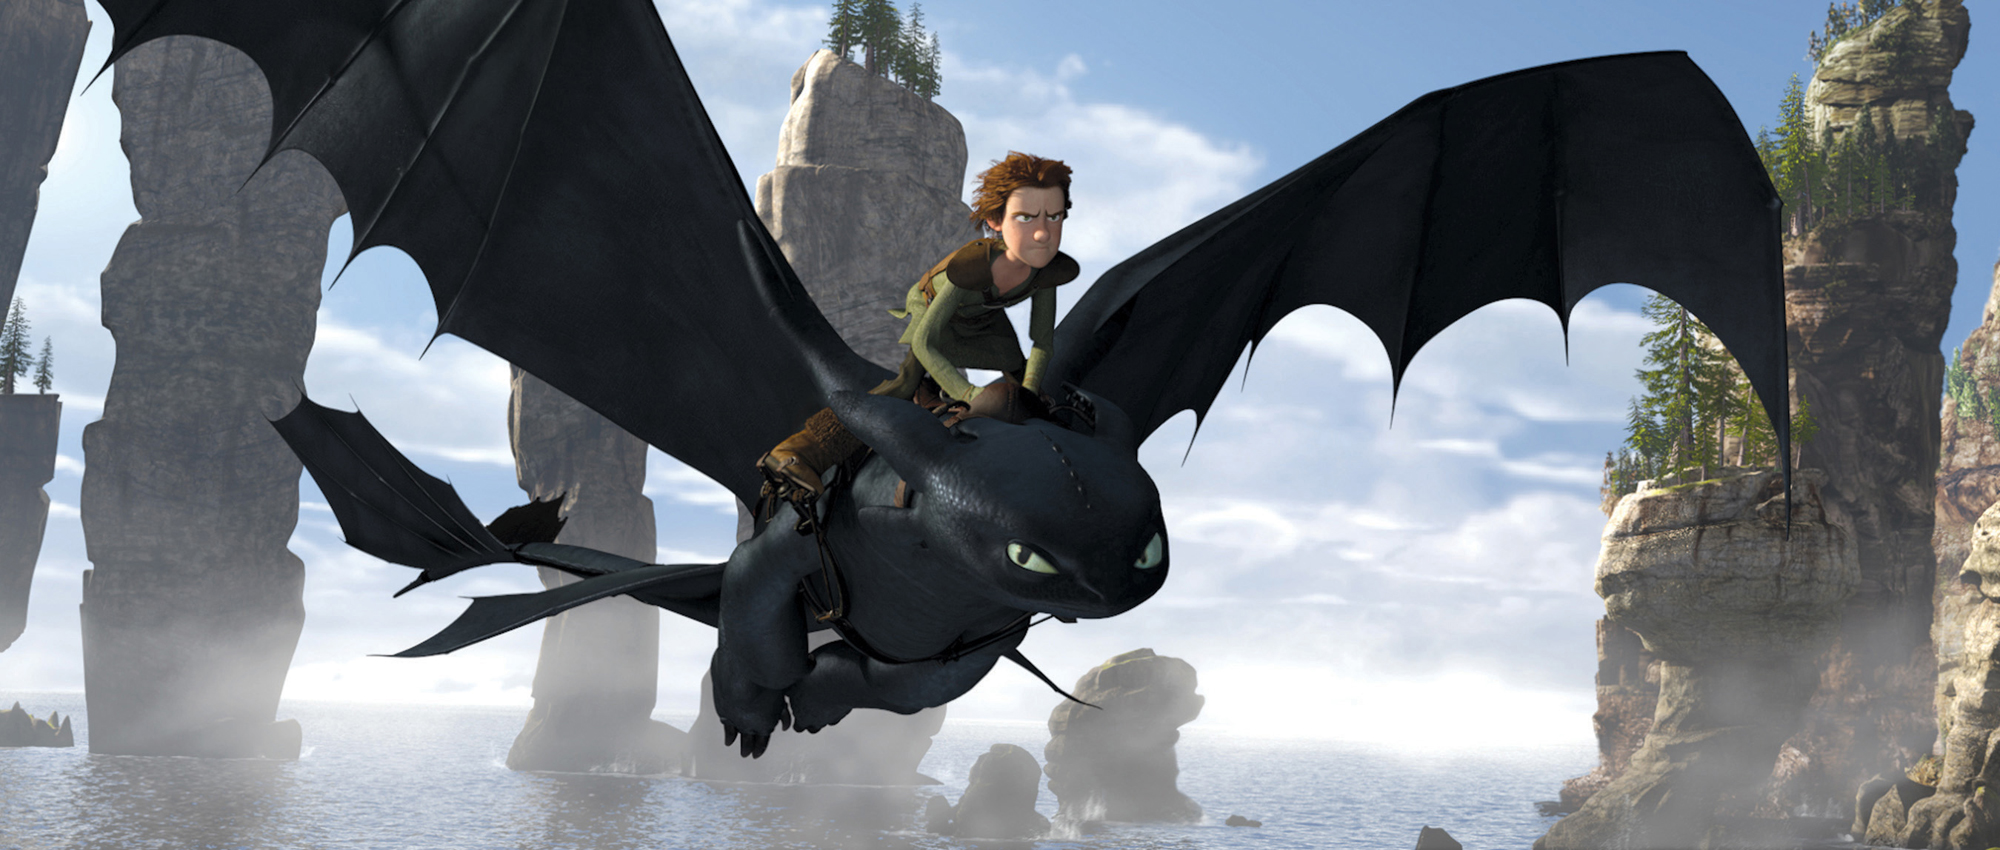 7. 'How to Train Your Dragon' (2010)